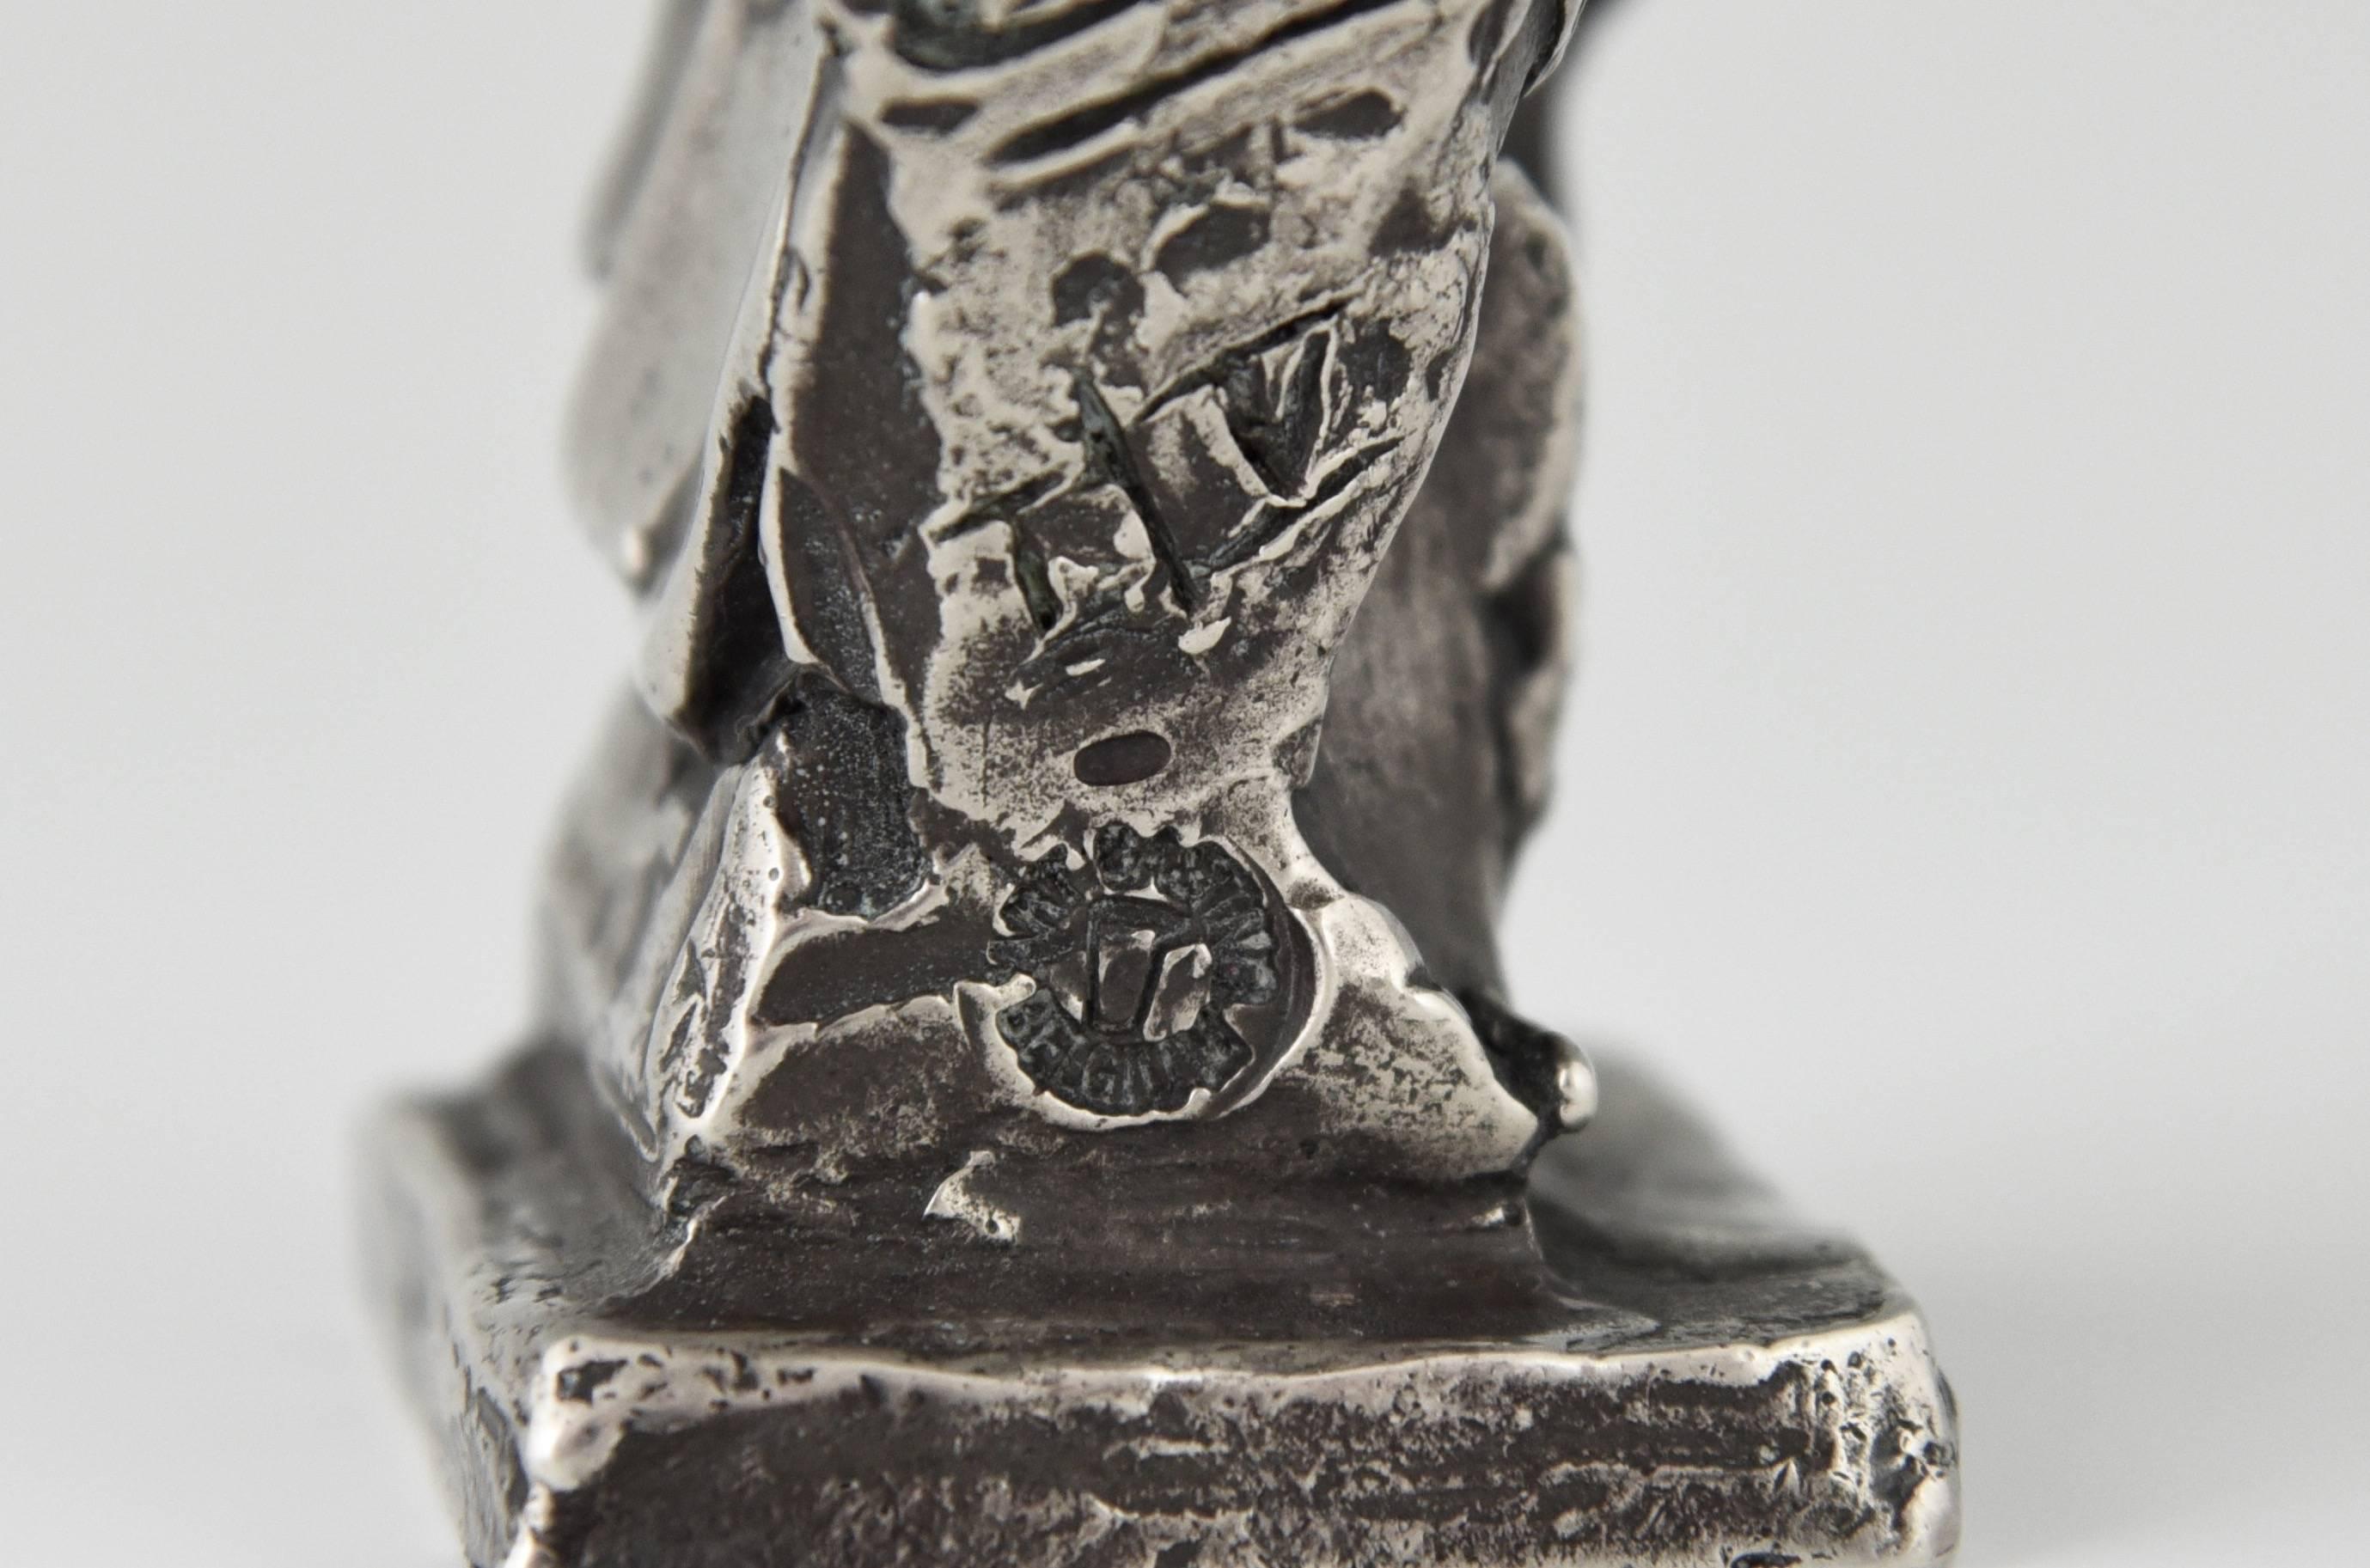 Contemporary Sterling Silver Sculpture of a Chimpanzee Monkey by Erwin Peeters